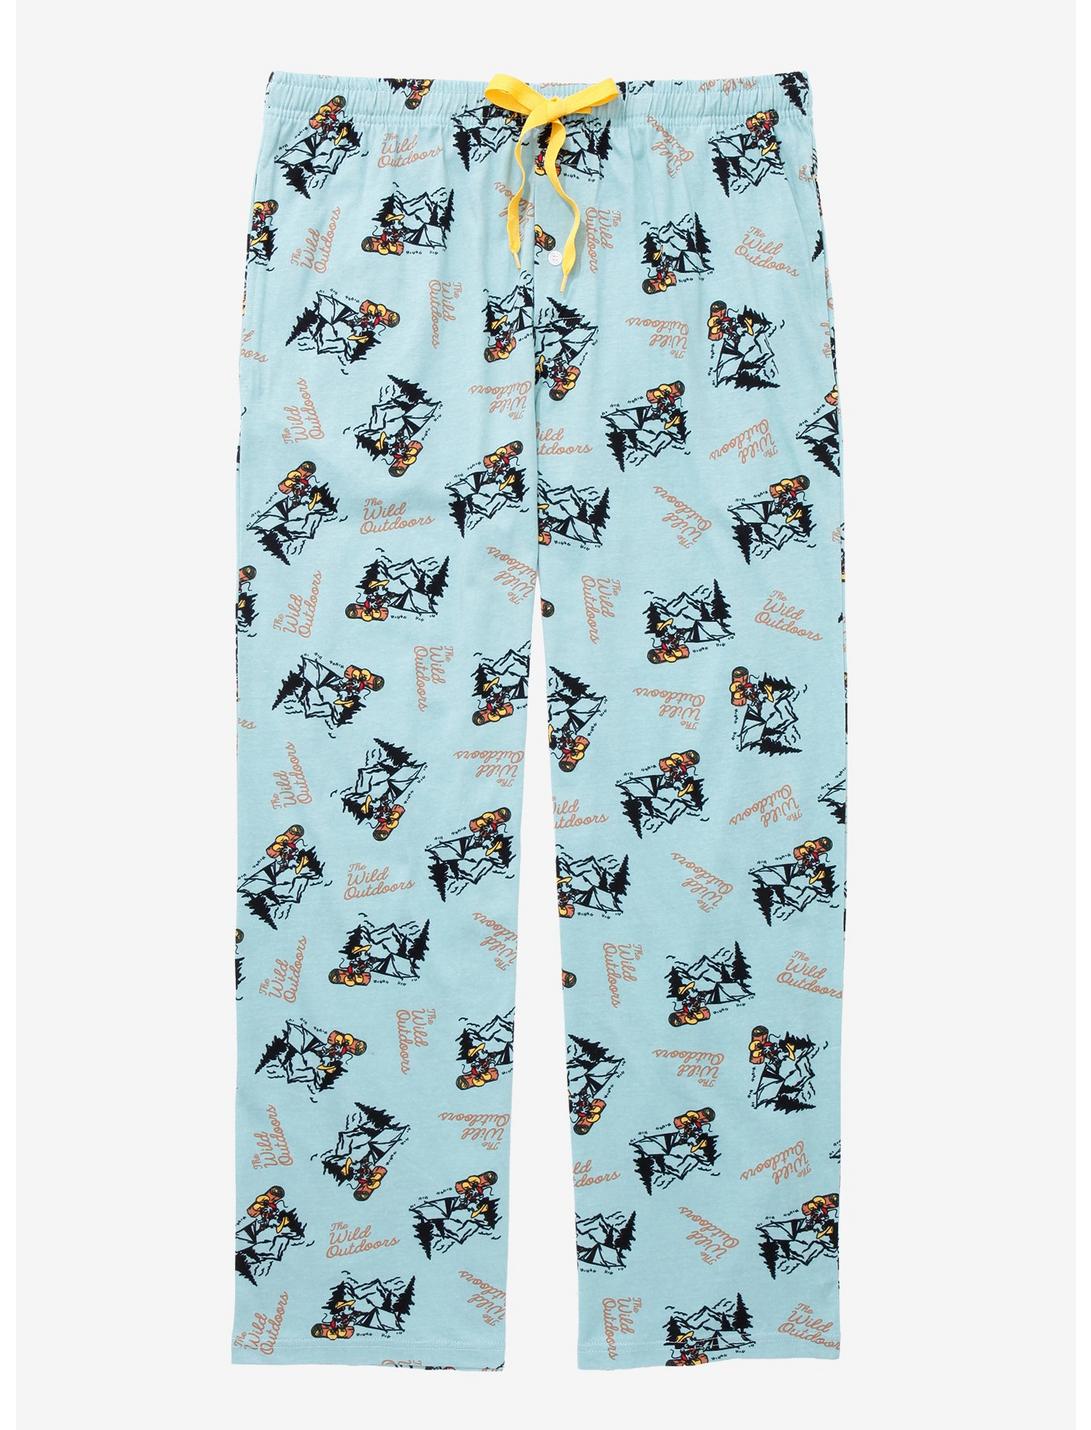 Disney Mickey Mouse The Wild Outdoors Sleep Pants - BoxLunch Exclusive, LIGHT BLUE, hi-res